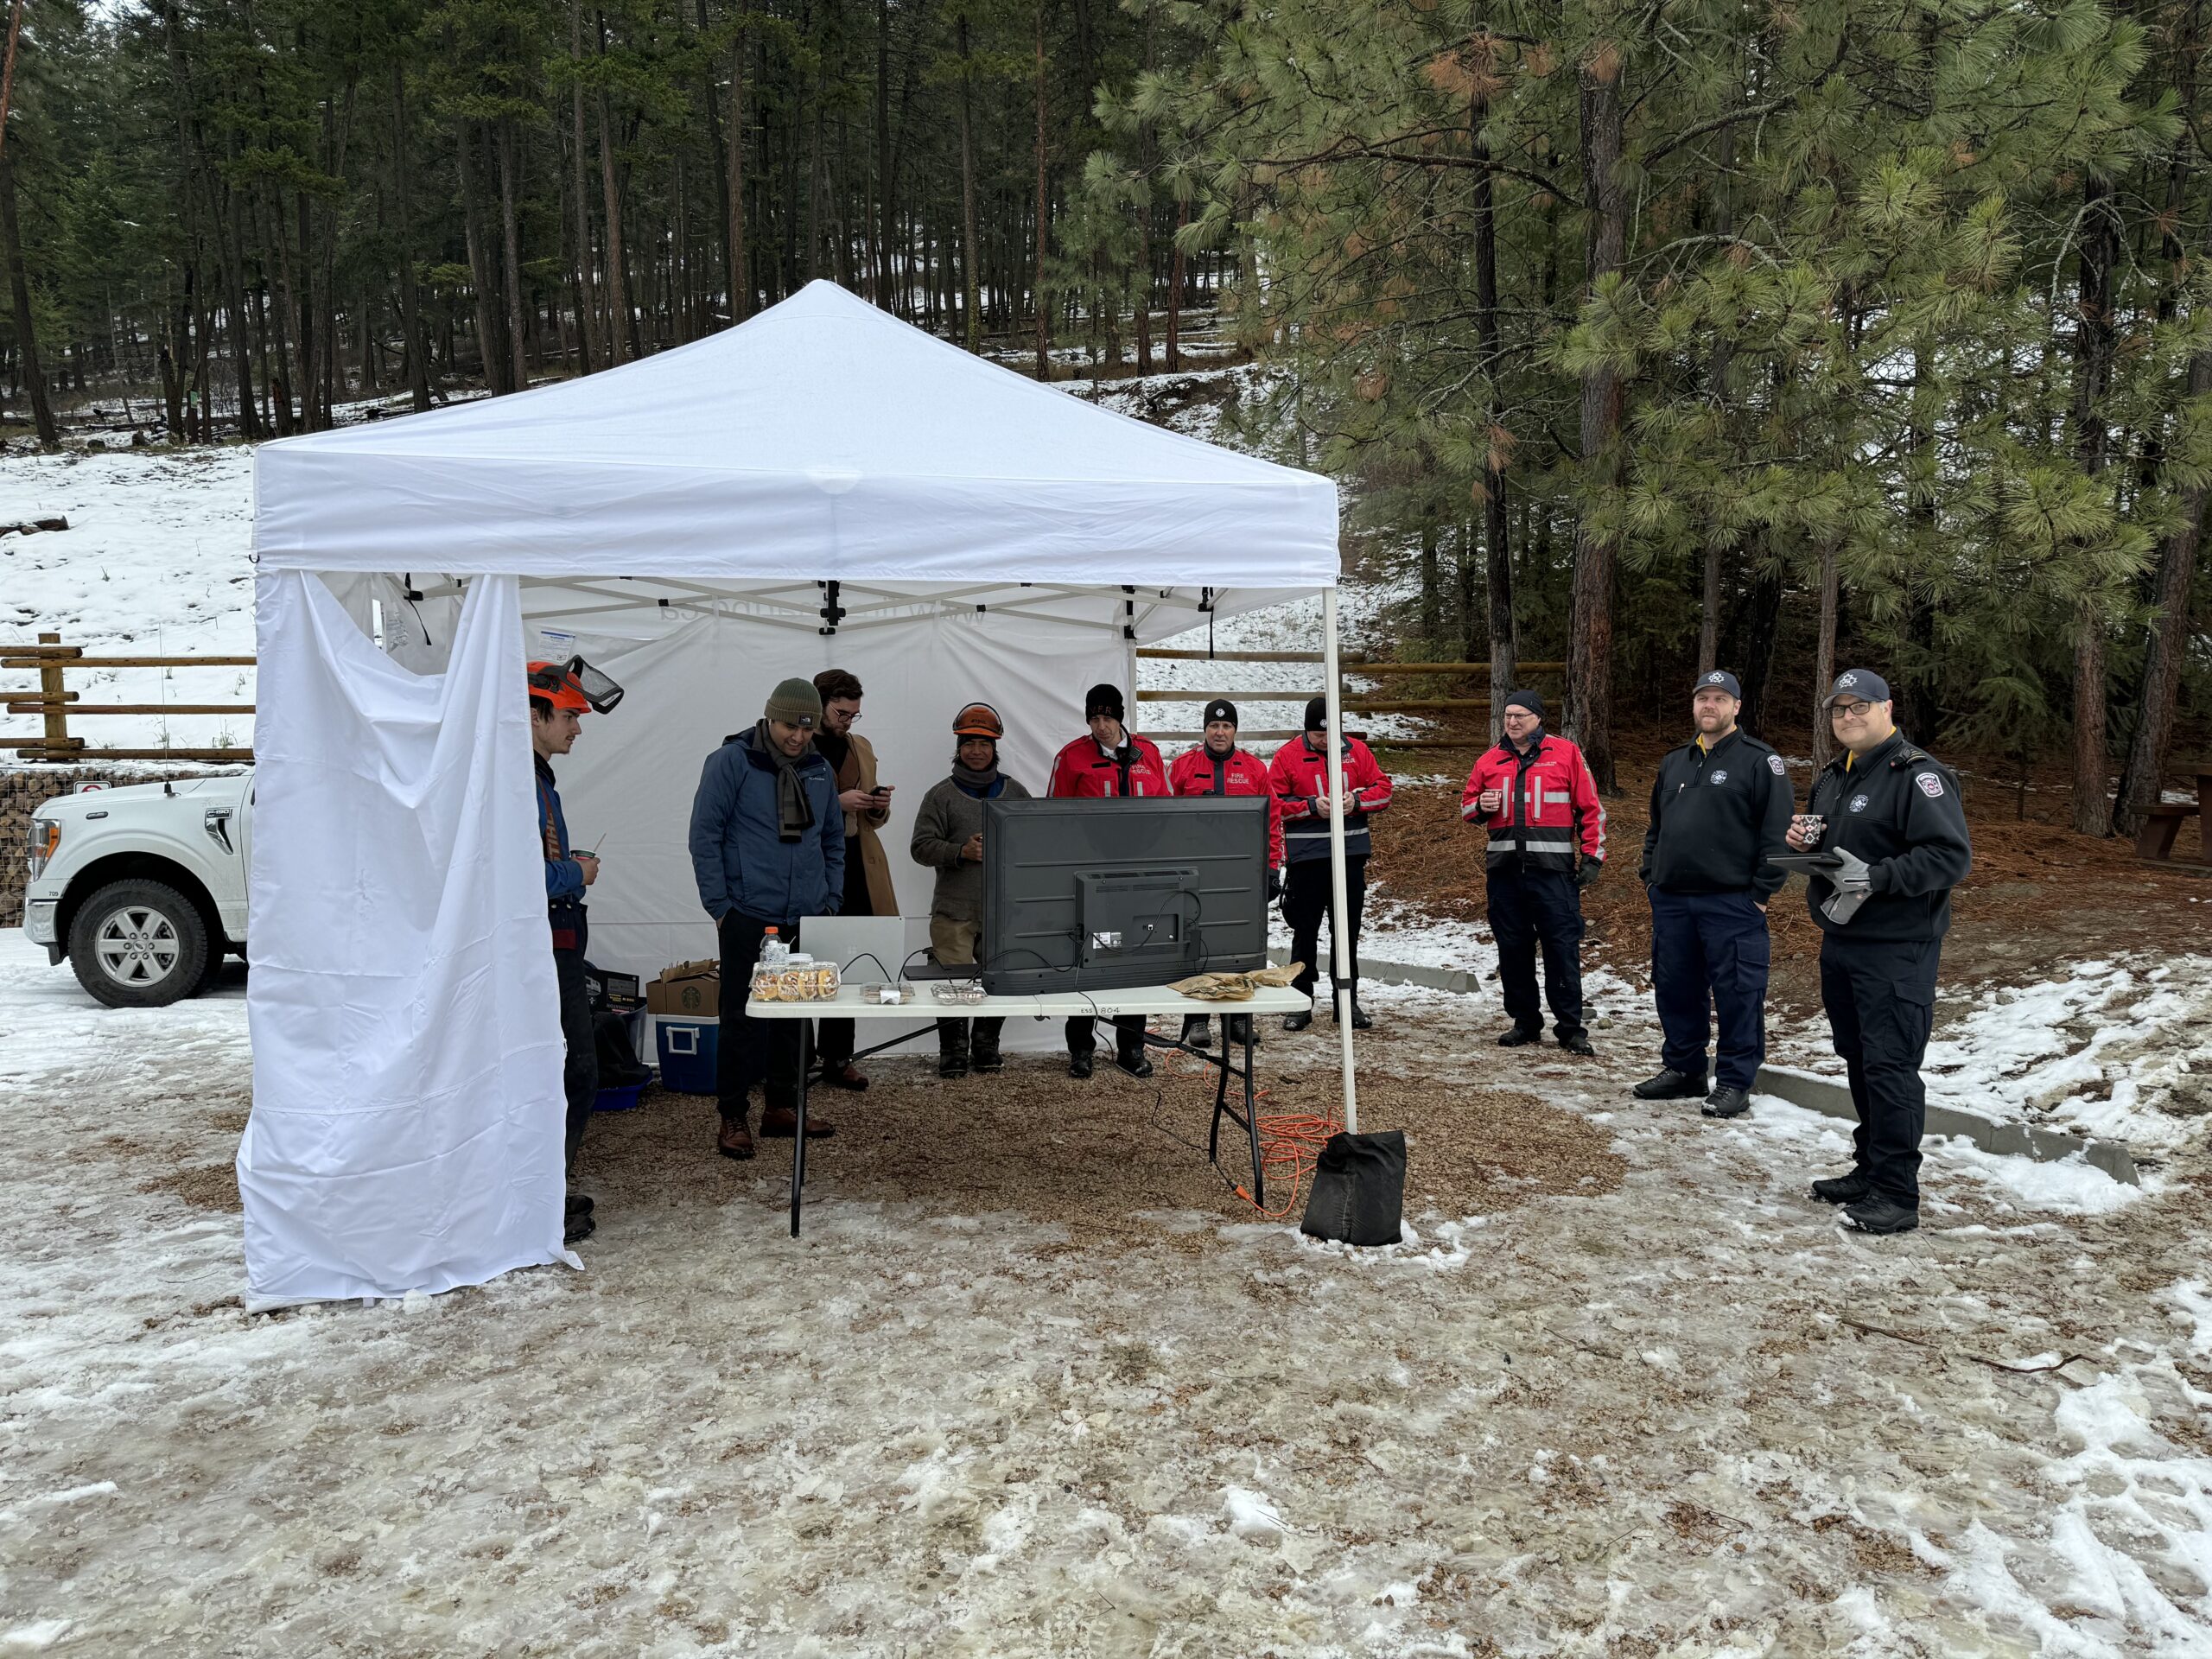 SenseNet's FireWard technology in action, showcasing a breakthrough in early wildfire detection during a critical testing phase for emergency response teams.